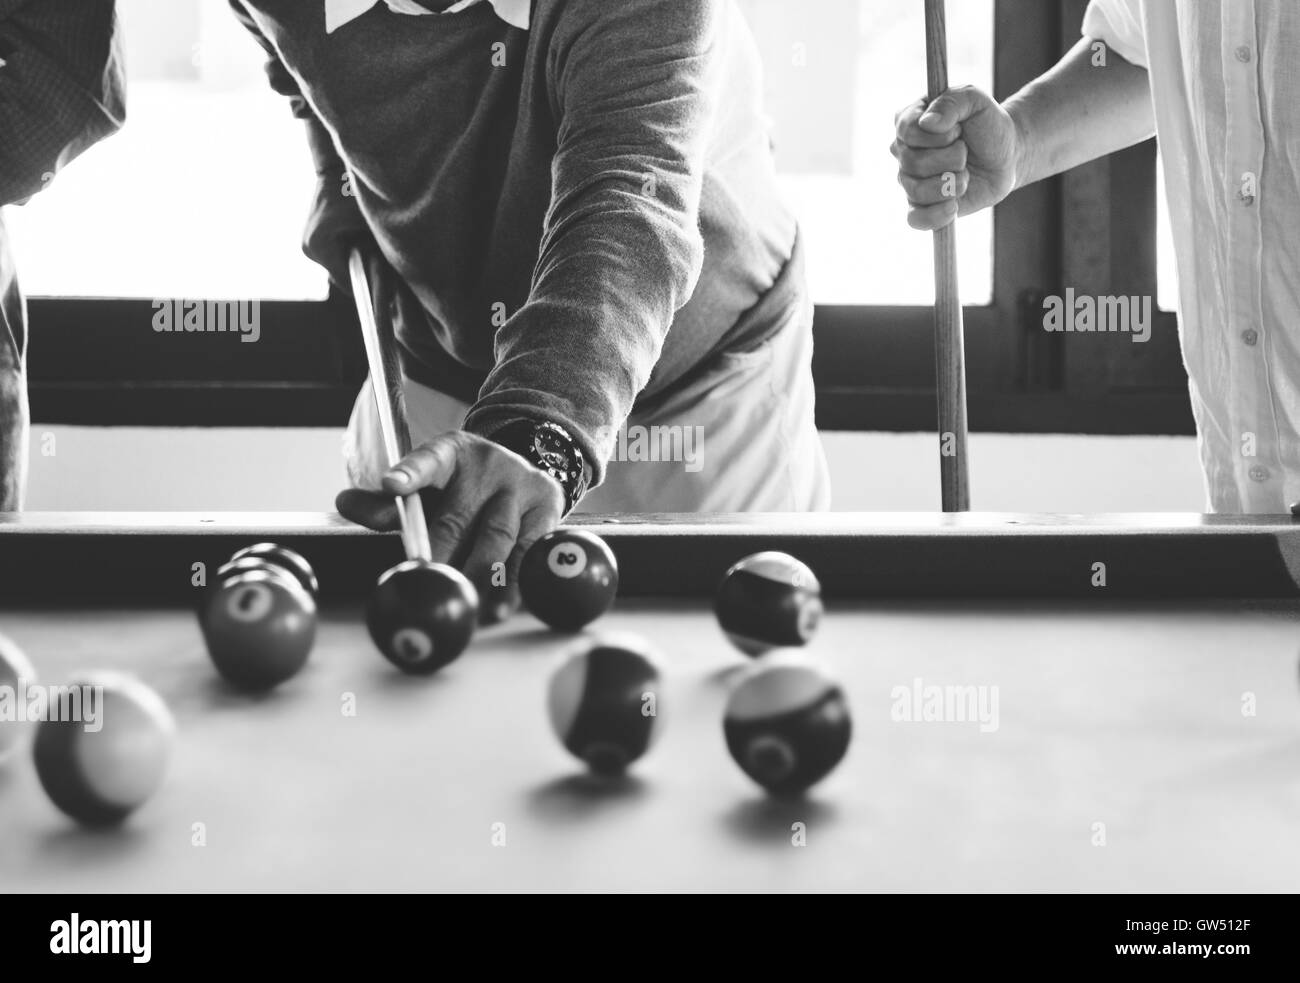 The billiard party Black and White Stock Photos & Images - Alamy